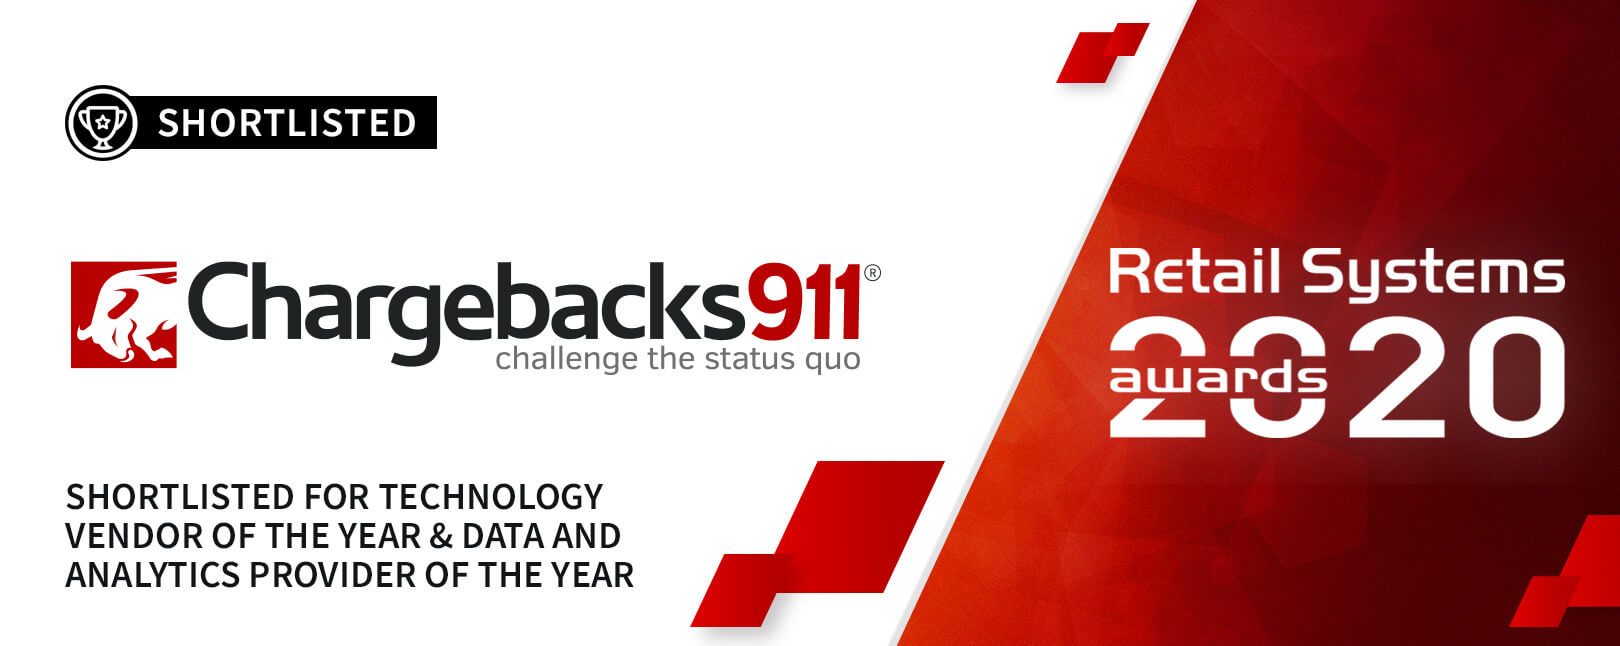 Chargebacks911® Selected for “Technology Vendor” & “Data and Analytics Provider” of the Year!